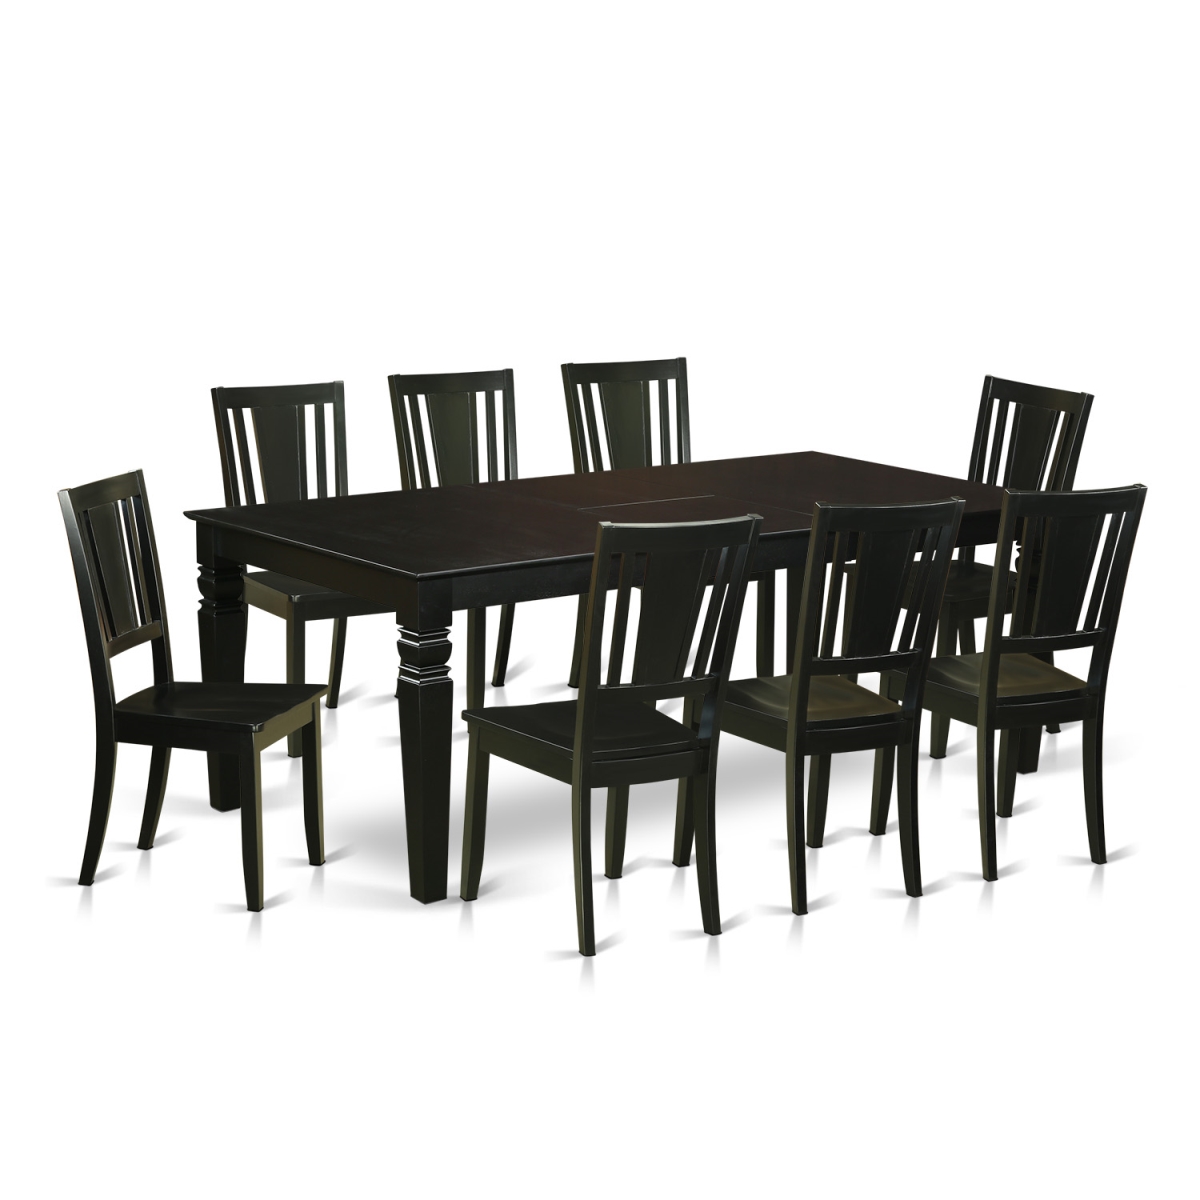 Dinette Set With A Single Logan Table & 8 Solid Wood Chairs, Luxurious Black - 9 Piece